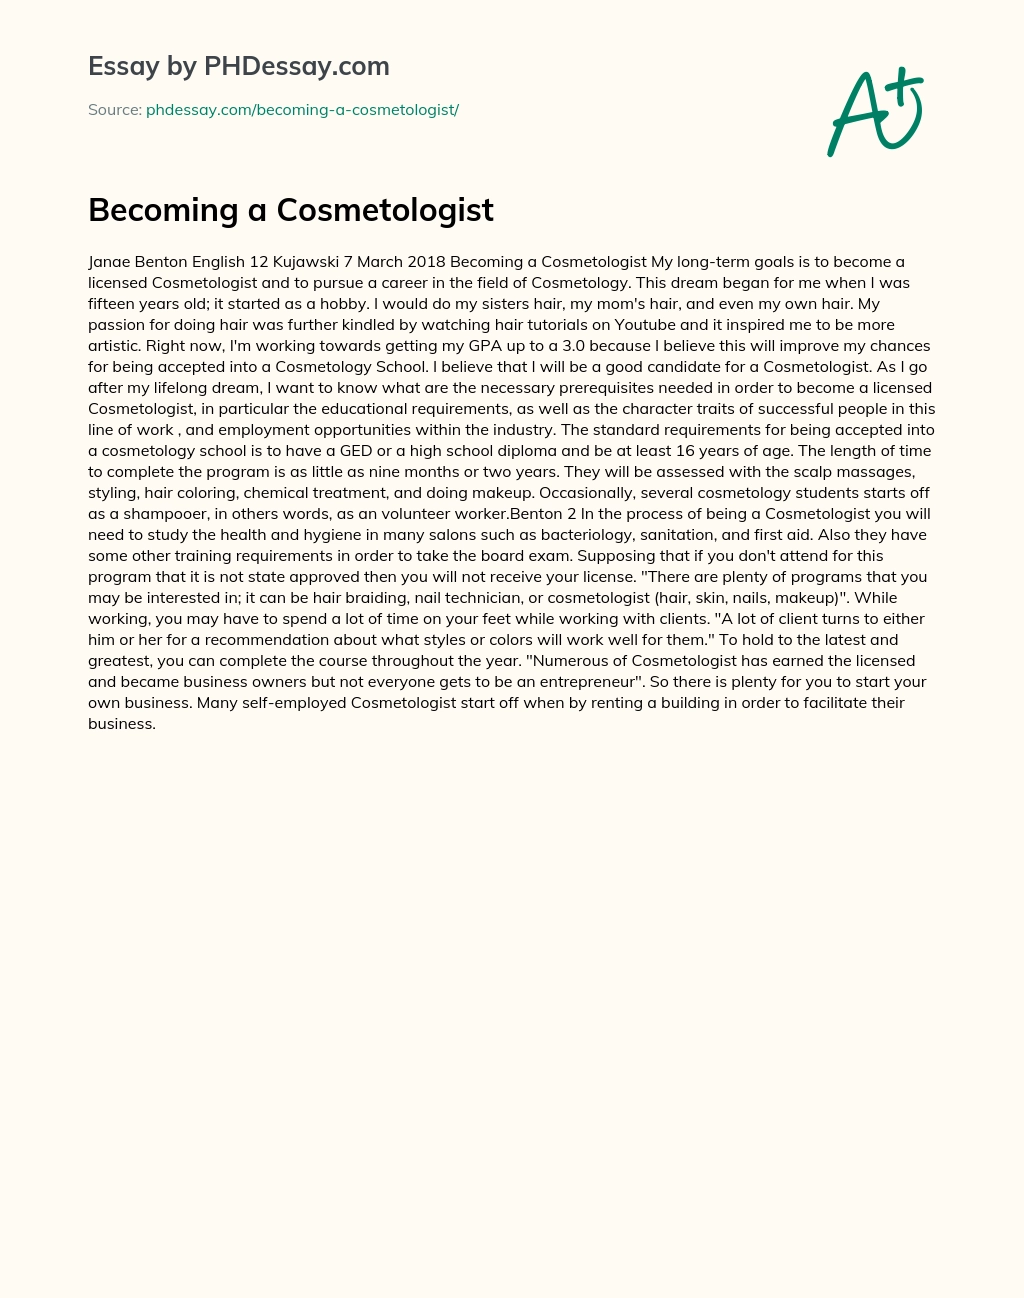 Becoming a Cosmetologist essay